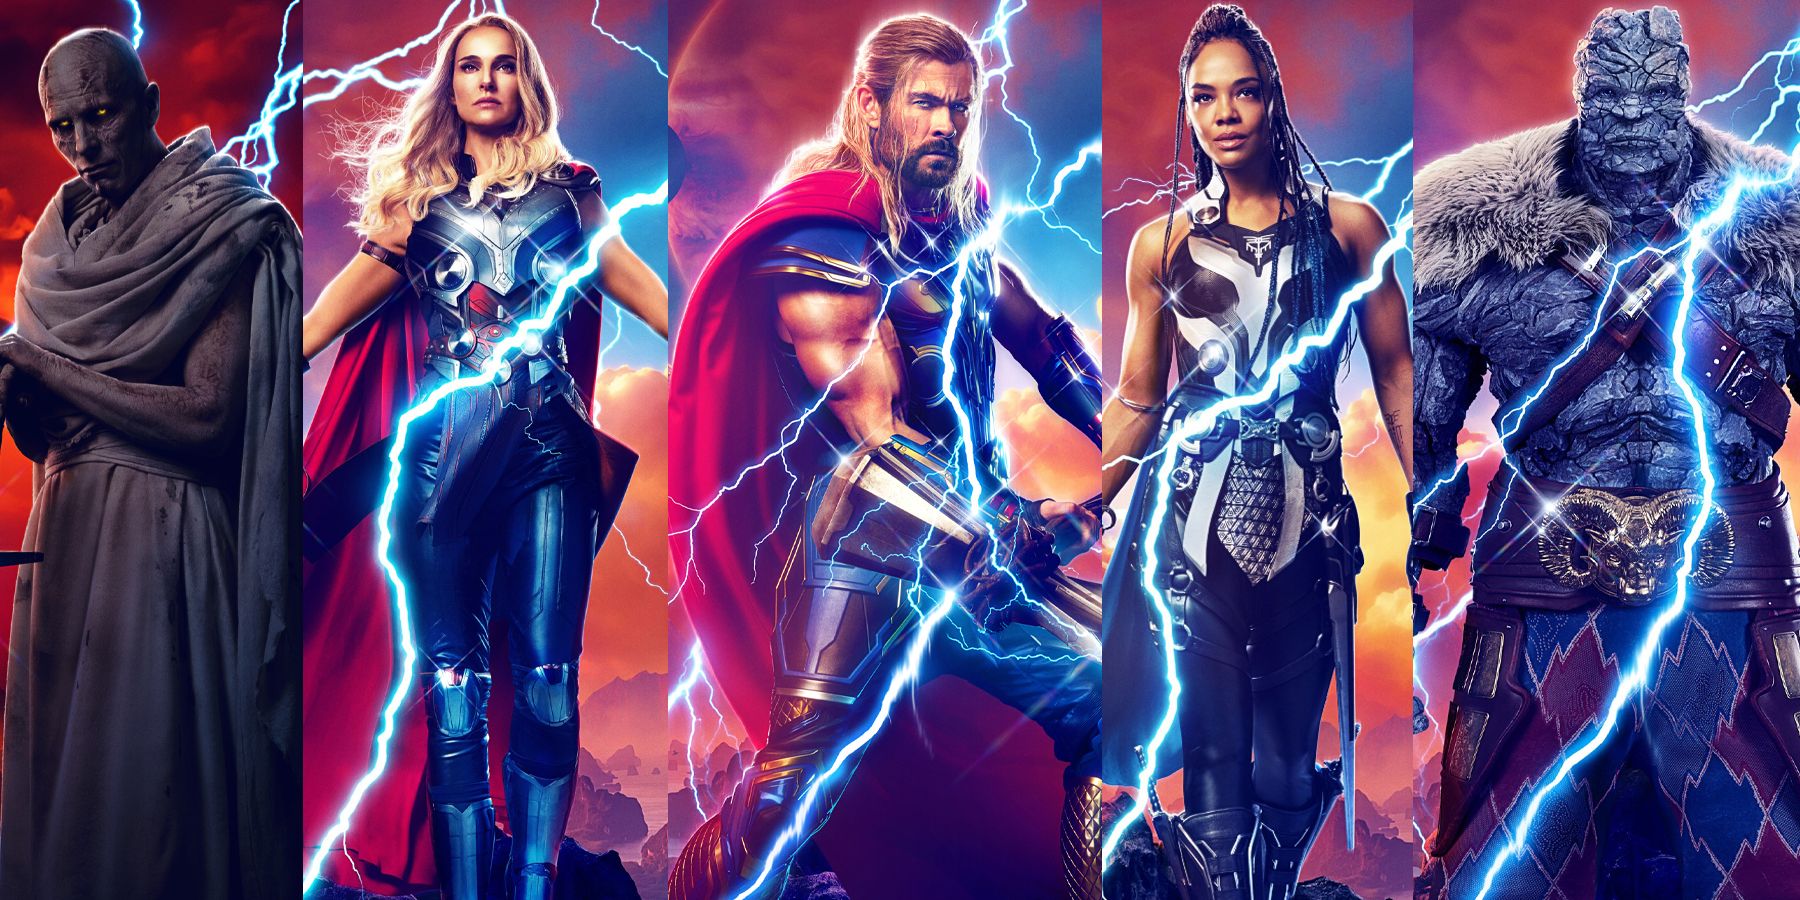 Thor: Love & Thunder Complete Cast Guide - Every MCU Character